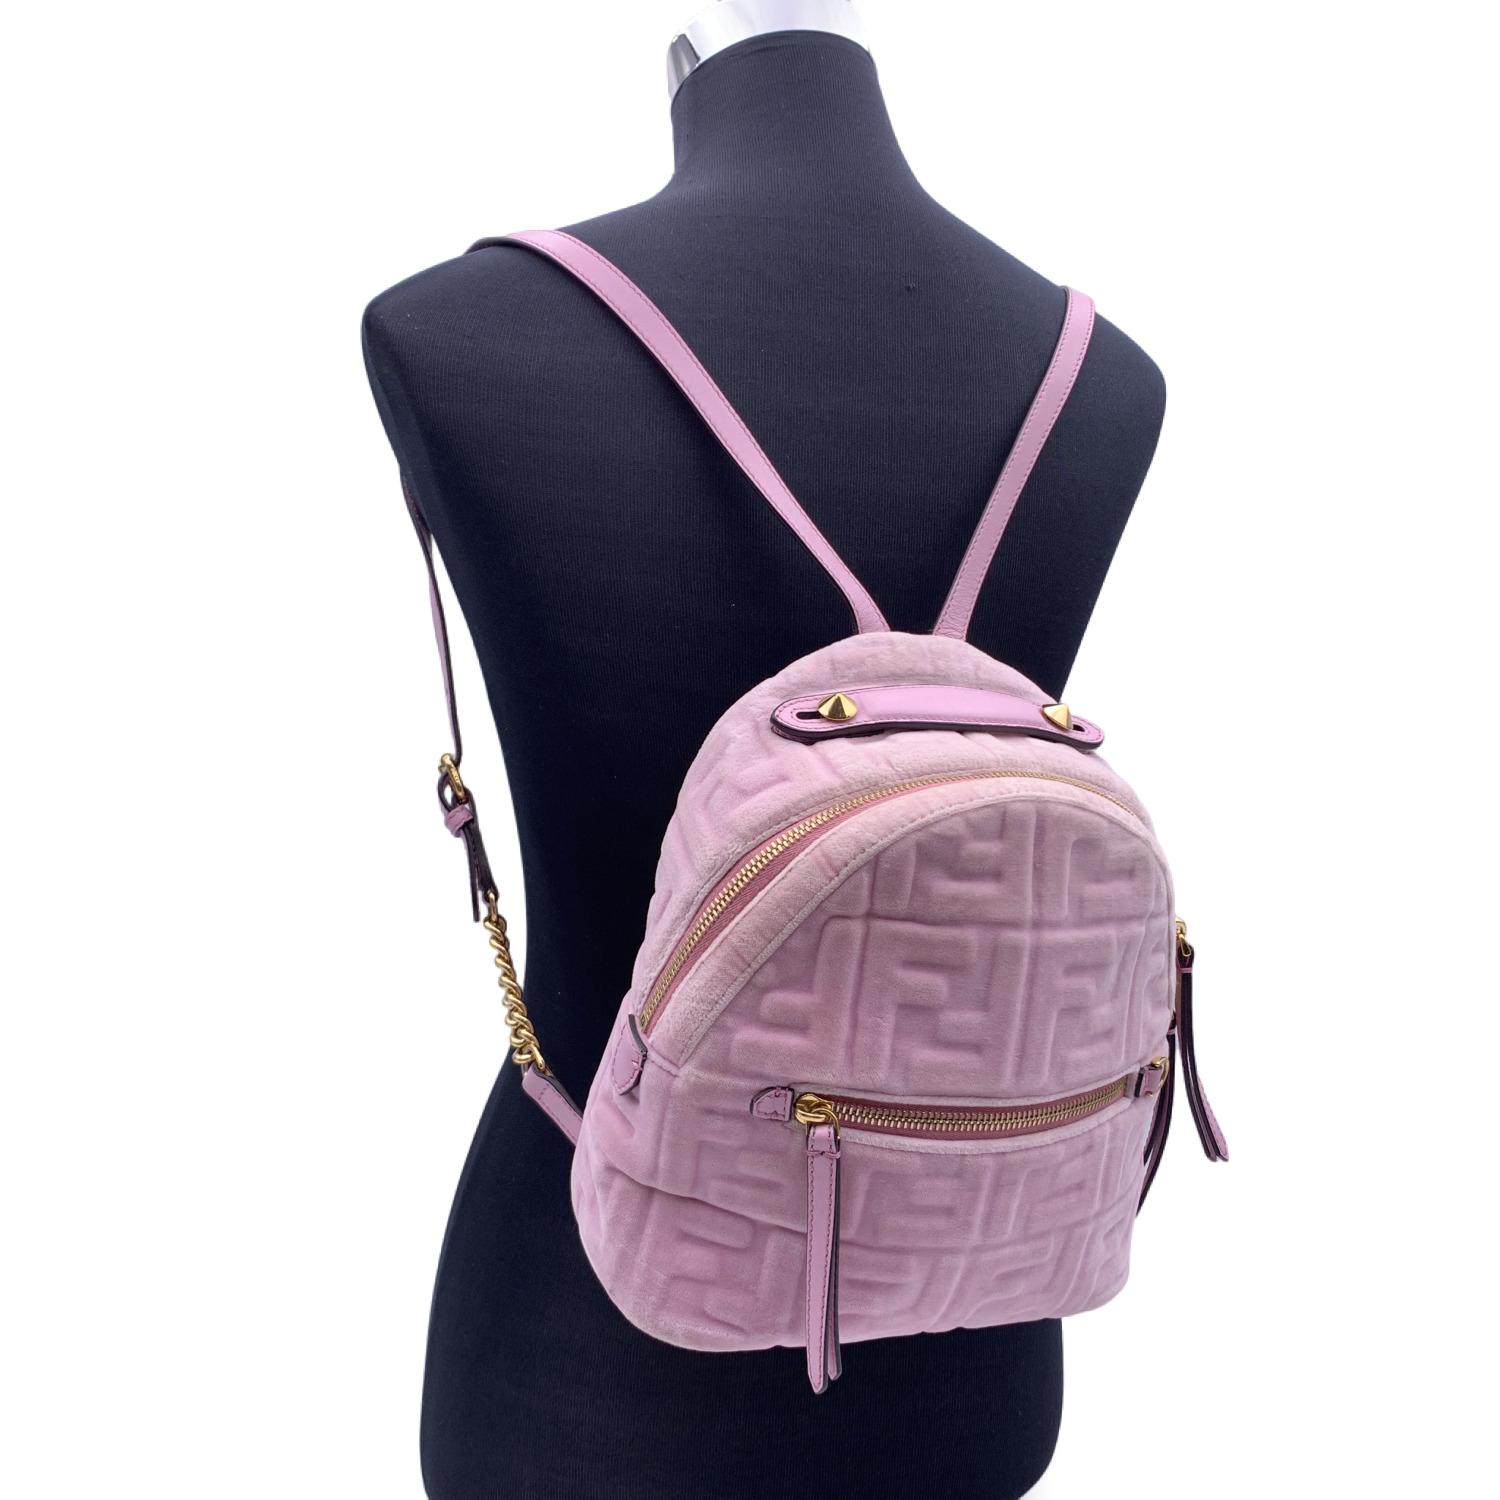 This beautiful Bag will come with a Certificate of Authenticity provided by Entrupy. The certificate will be provided at no further cost

Gorgeous FENDI mini backpack carfted in pink velvet with embossed FF monogram pattern. Leather handles and